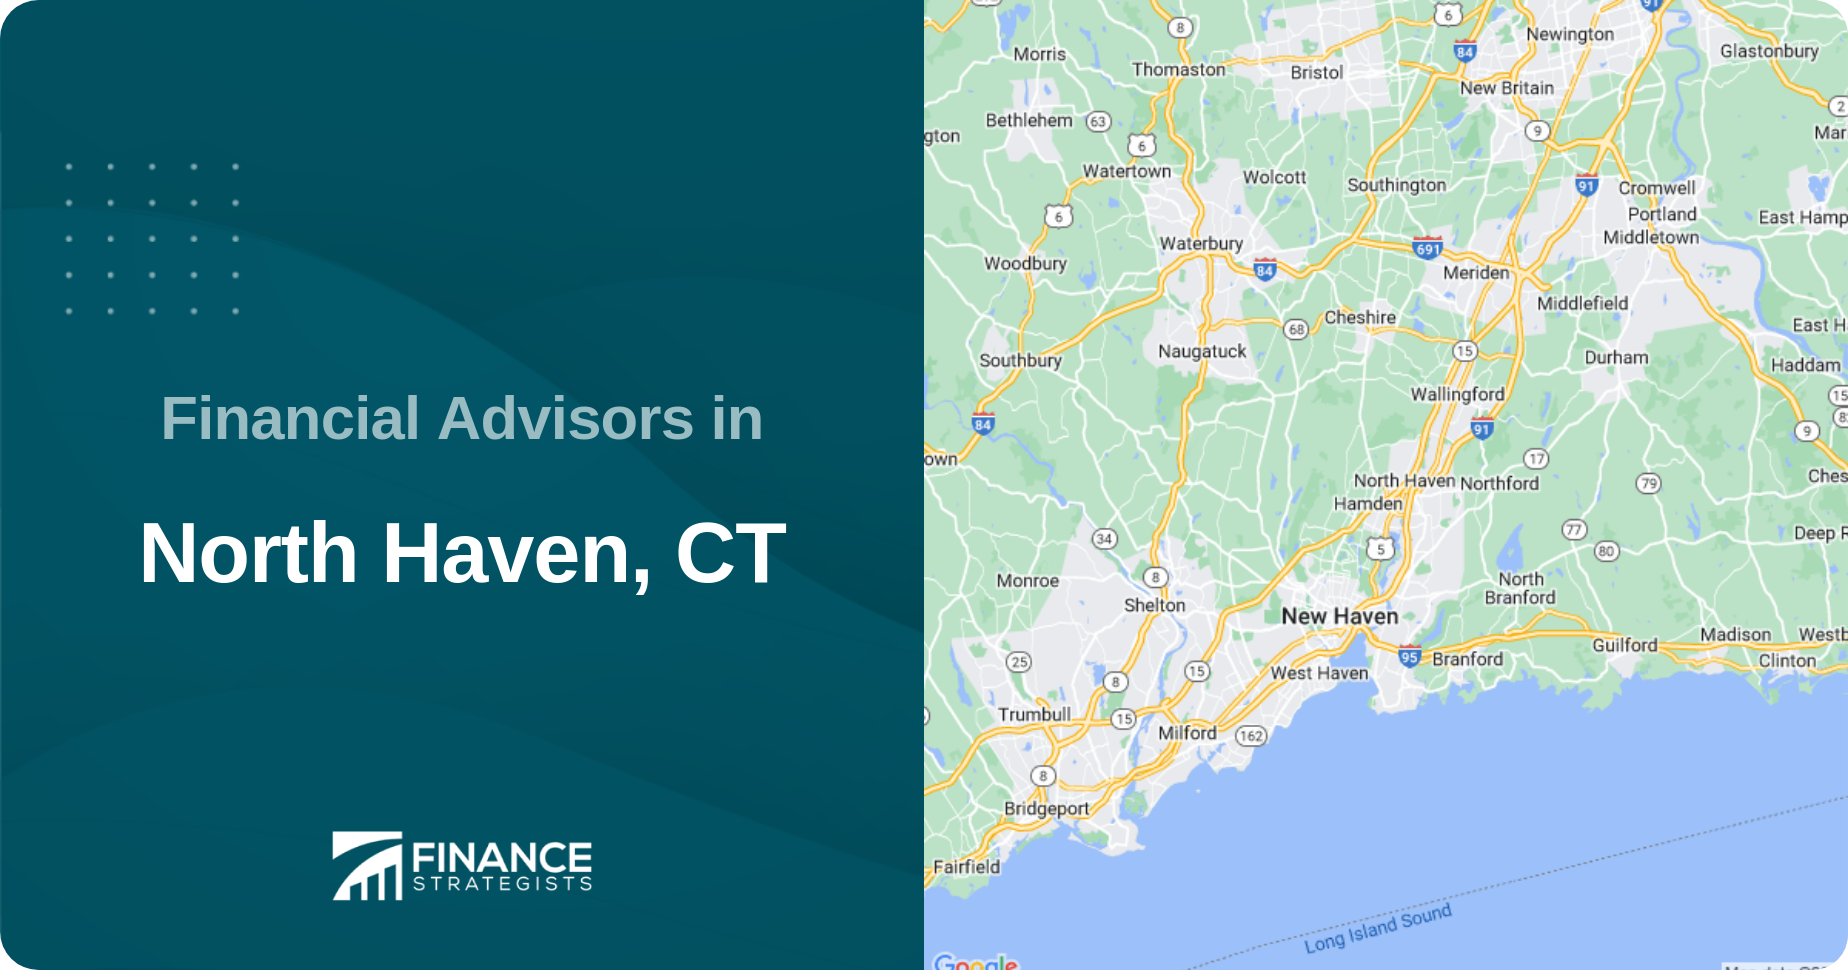 Financial Advisors in North Haven, CT